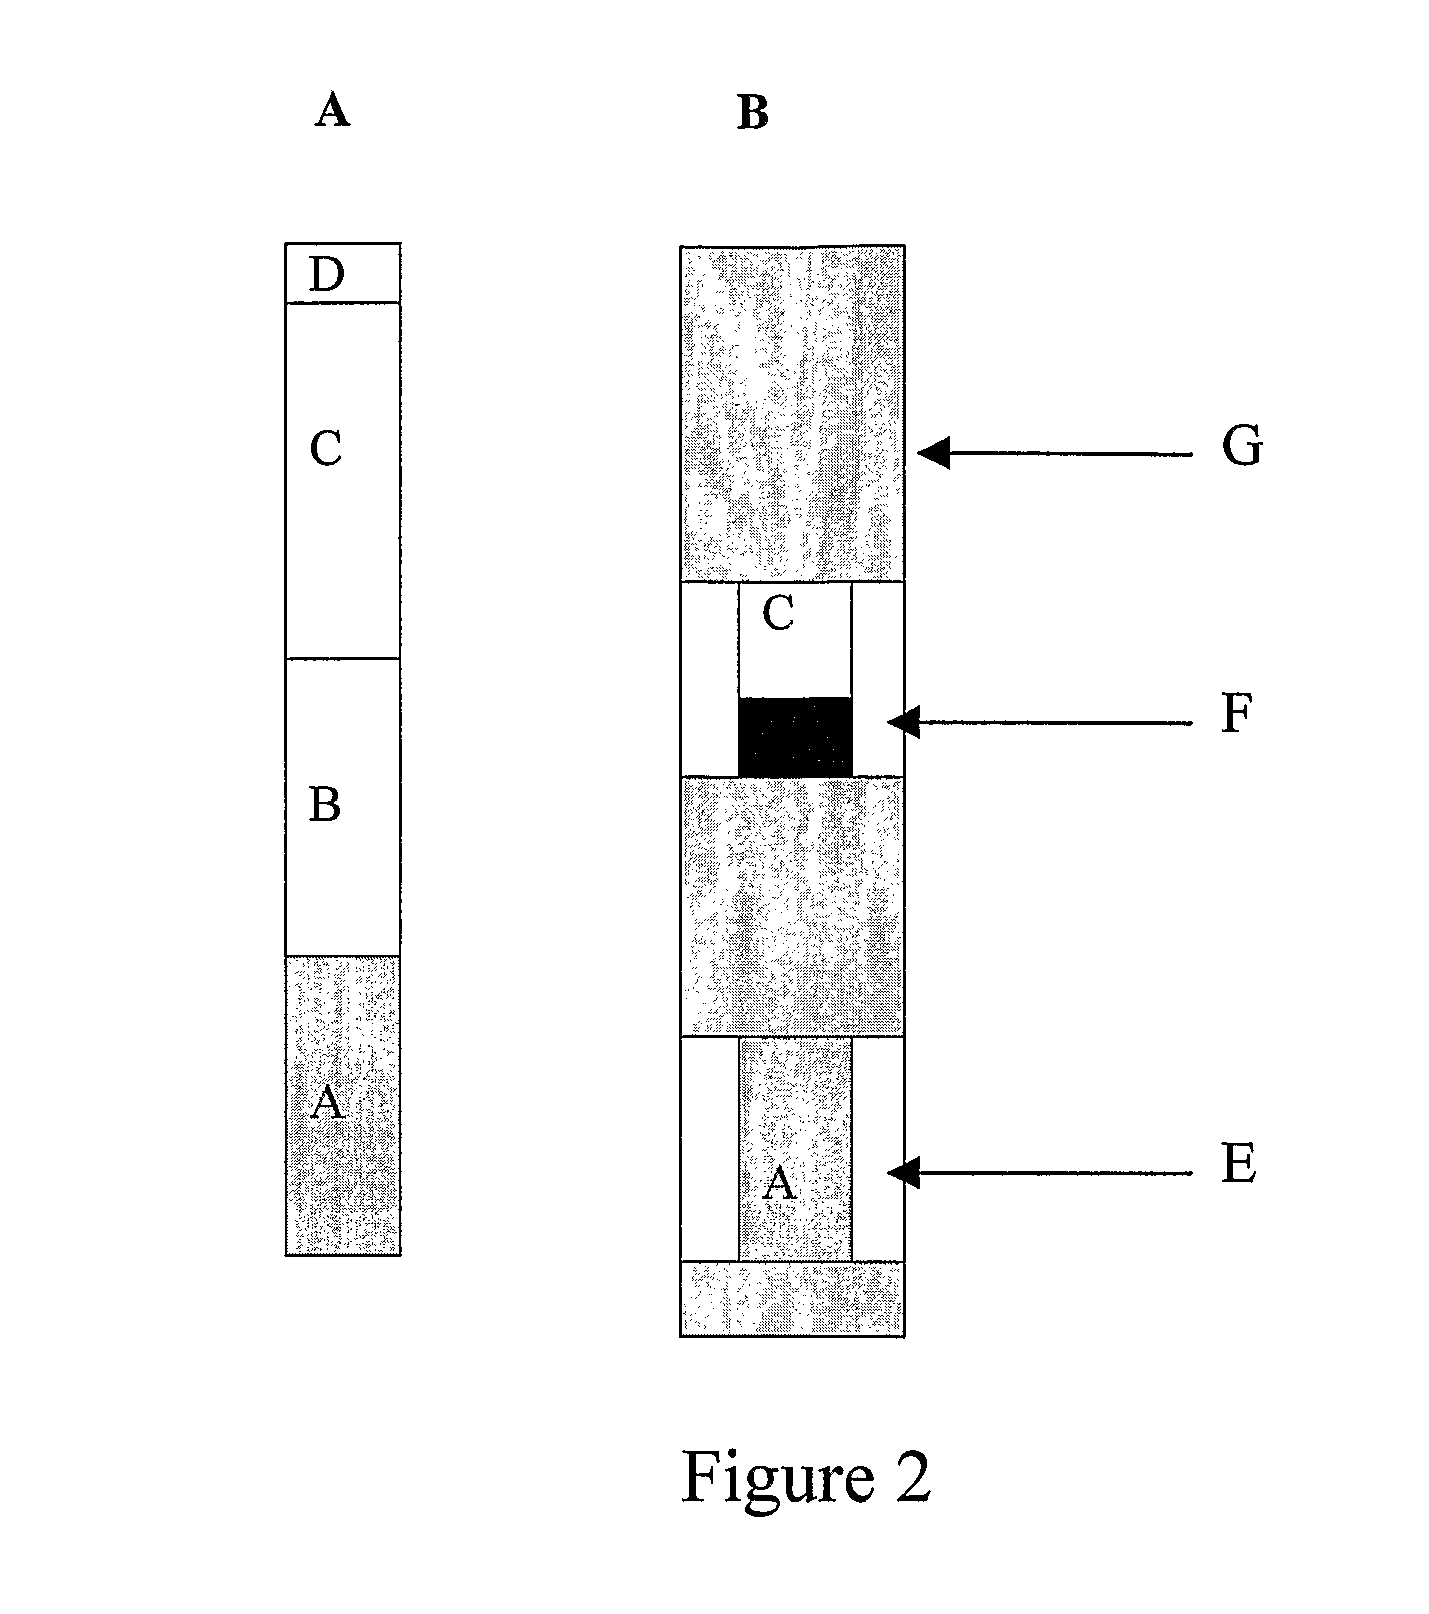 Device and Method for Detecting the Presence of Hemoglobin in a Biological Sample